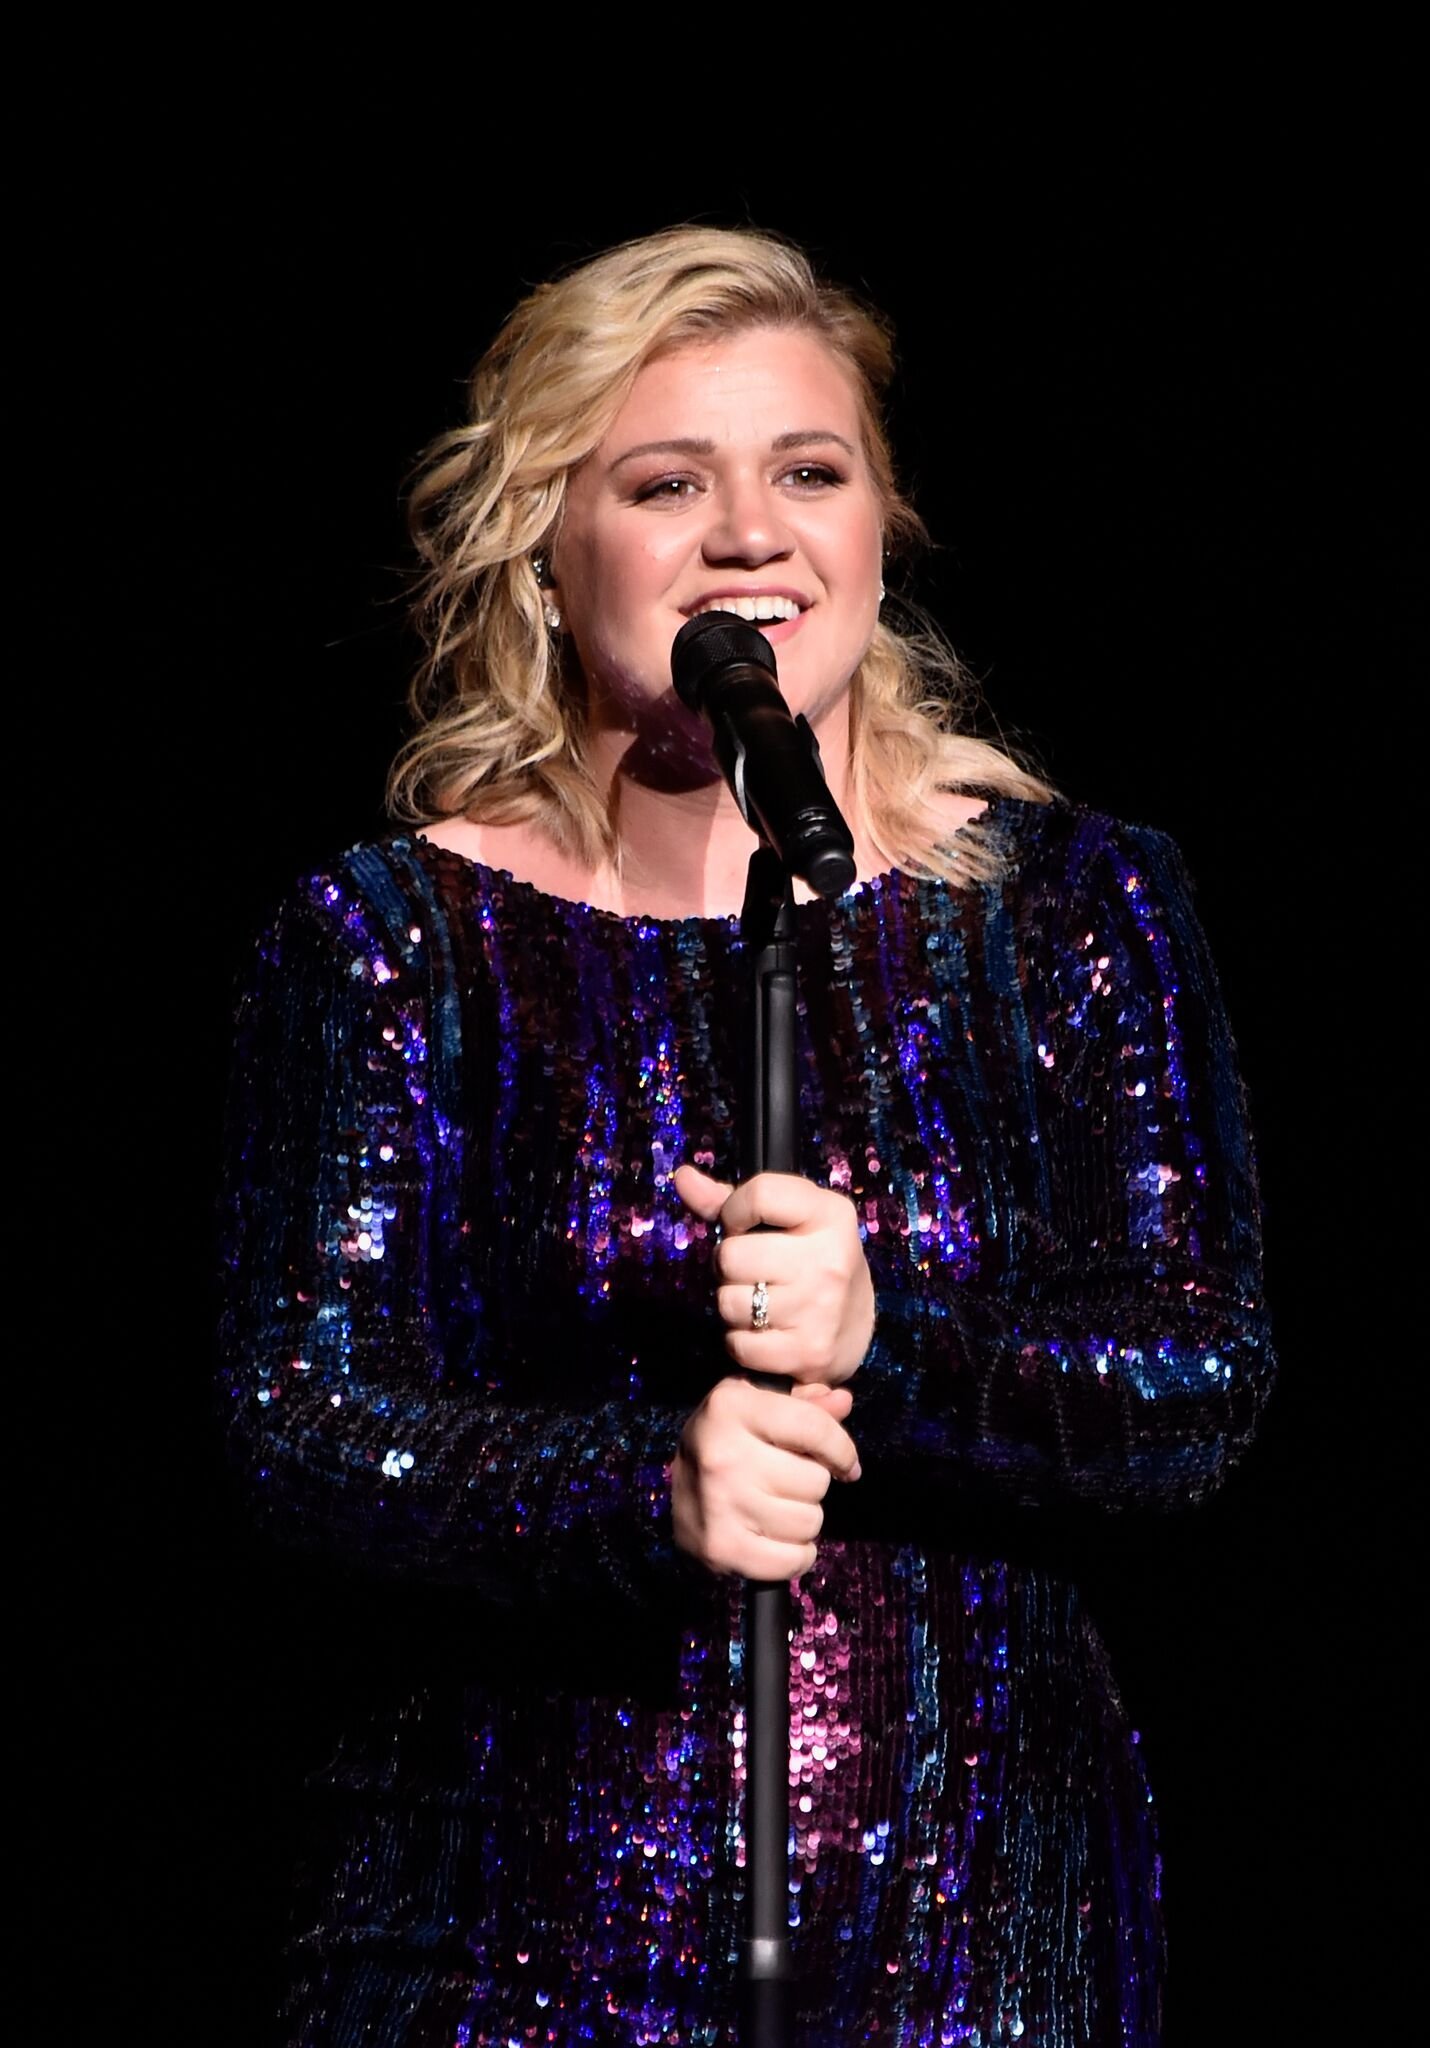  Kelly Clarkson performs at the Sands Cares INSPIRE 2019 charity concert benefiting local nonprofit organizations | Getty Images